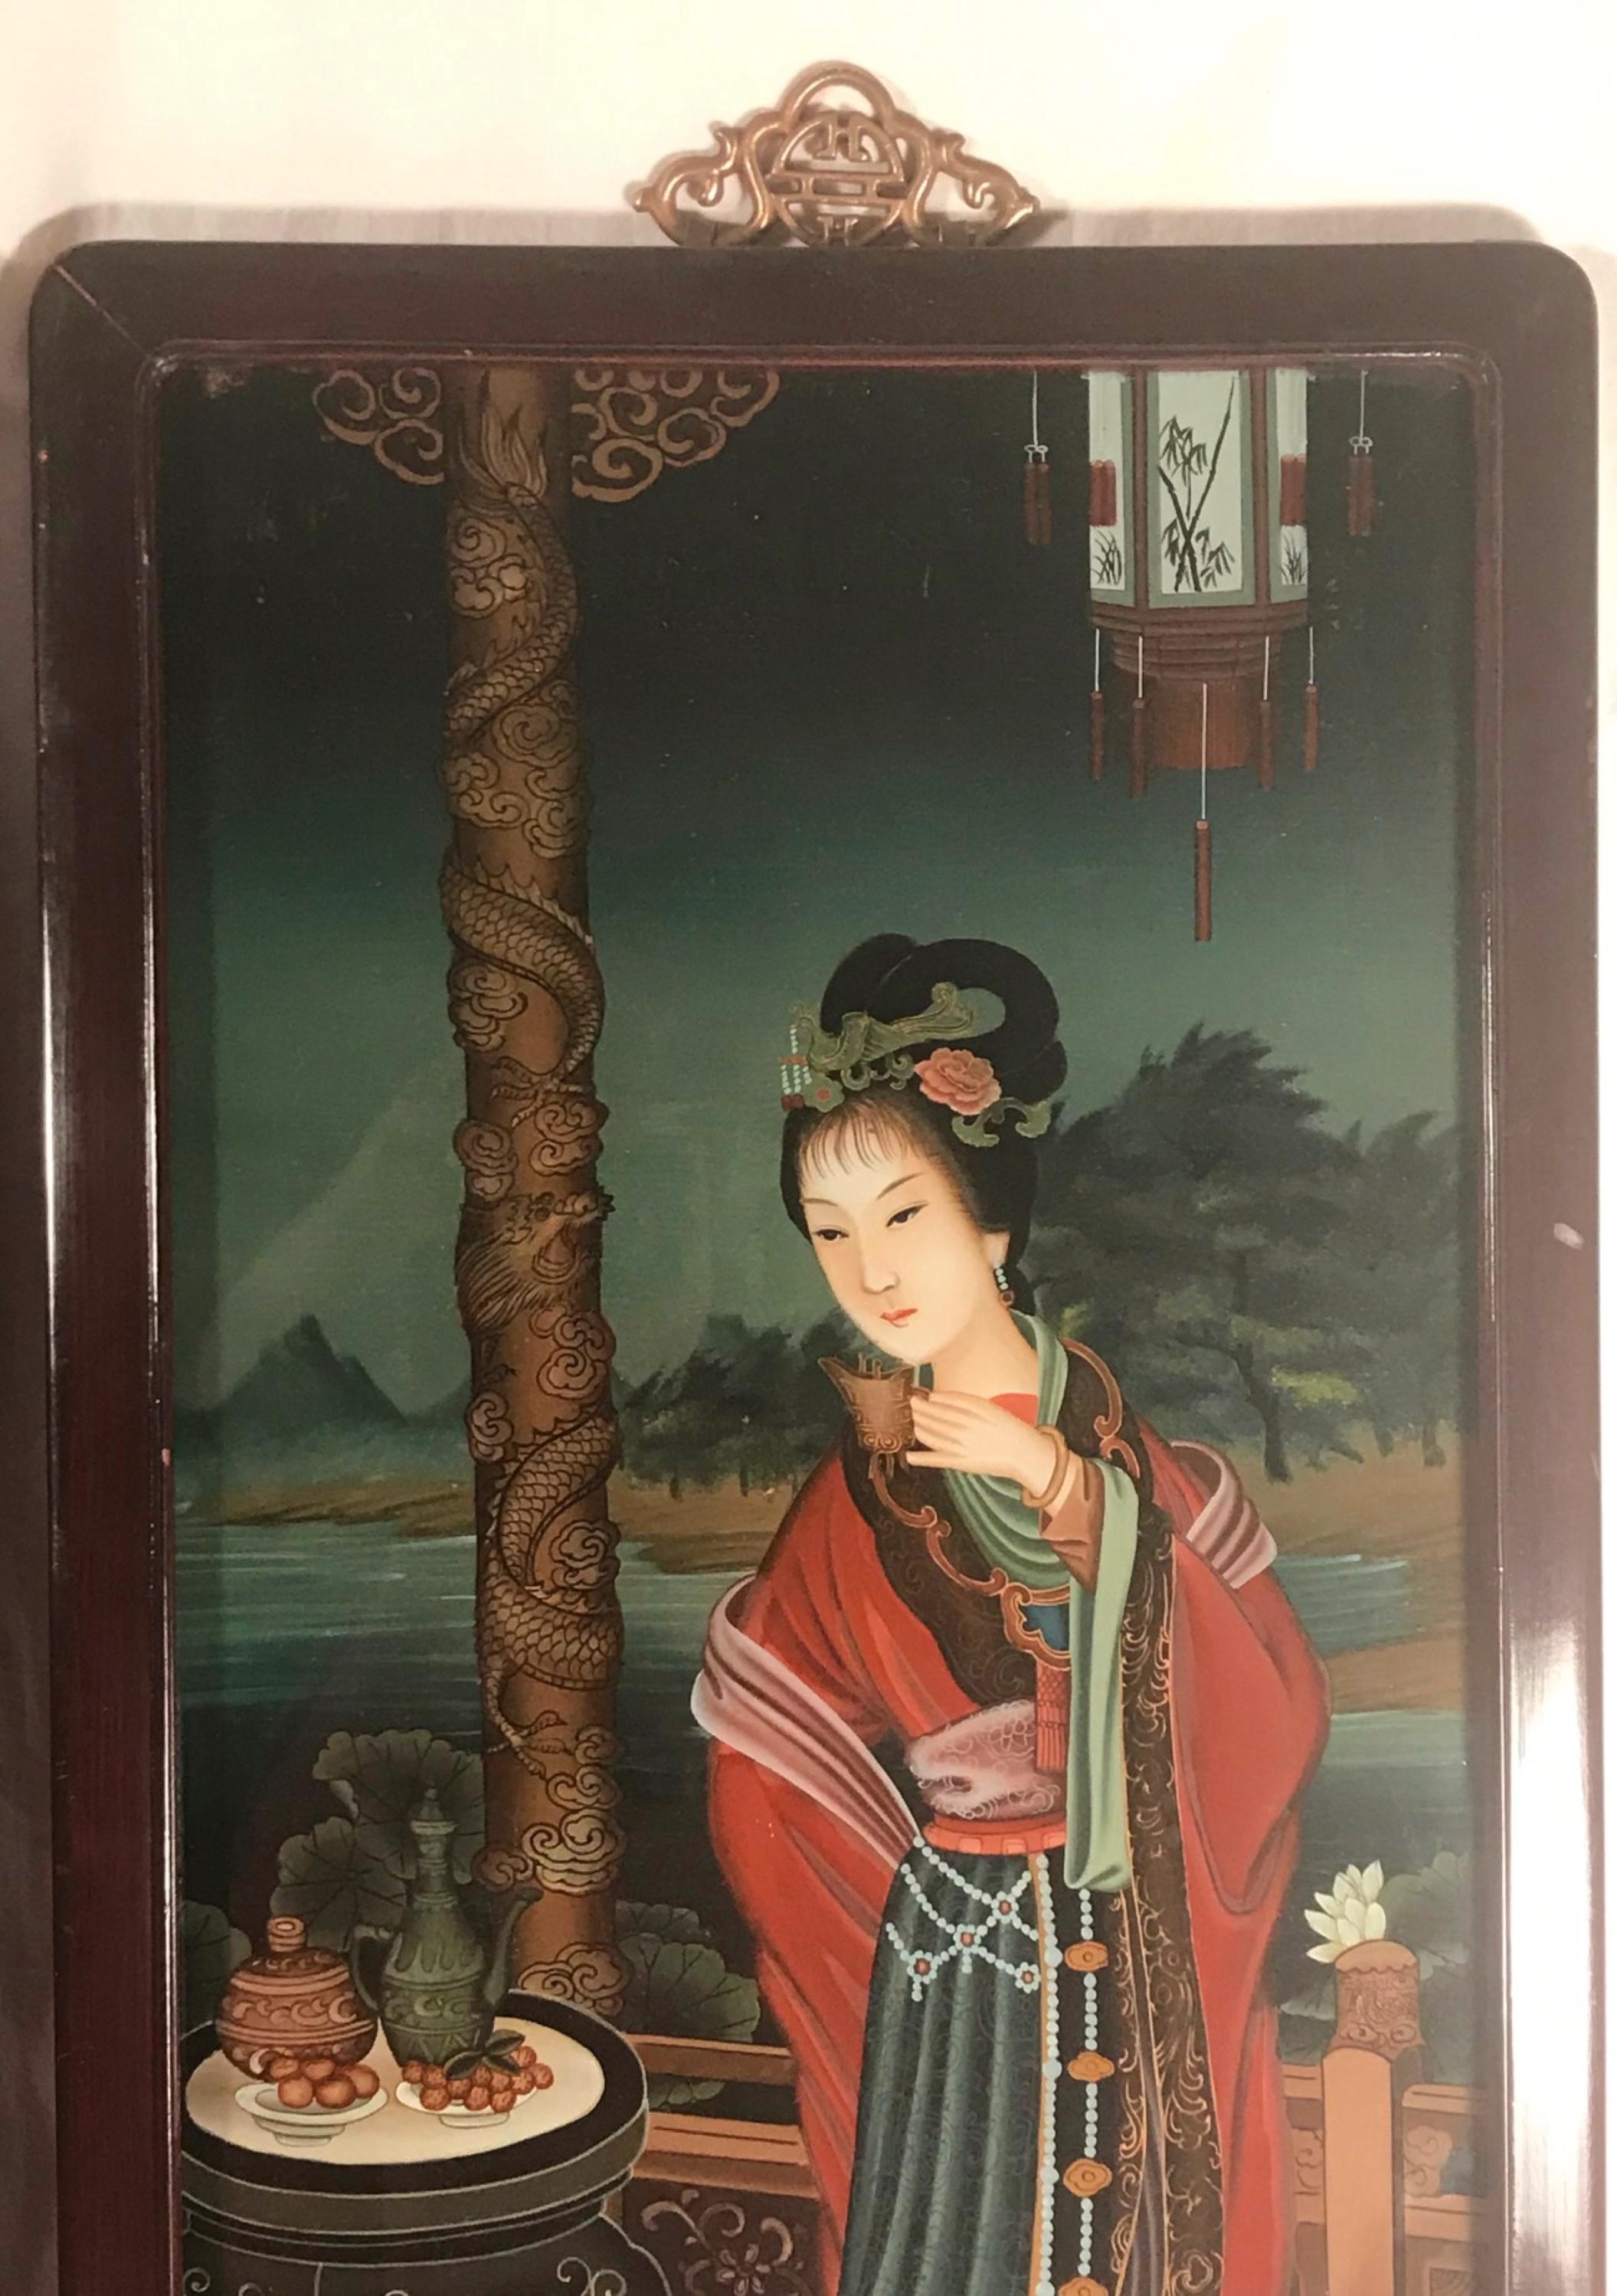 Pair of early 20th century Verre Eglomise Chinese Export Reverse glass paintings.

Beautiful pair of Chinese reverse glass paintings of Geisha girls. This matching pair is exquisite in color and detail. The wood framed paintings are in good